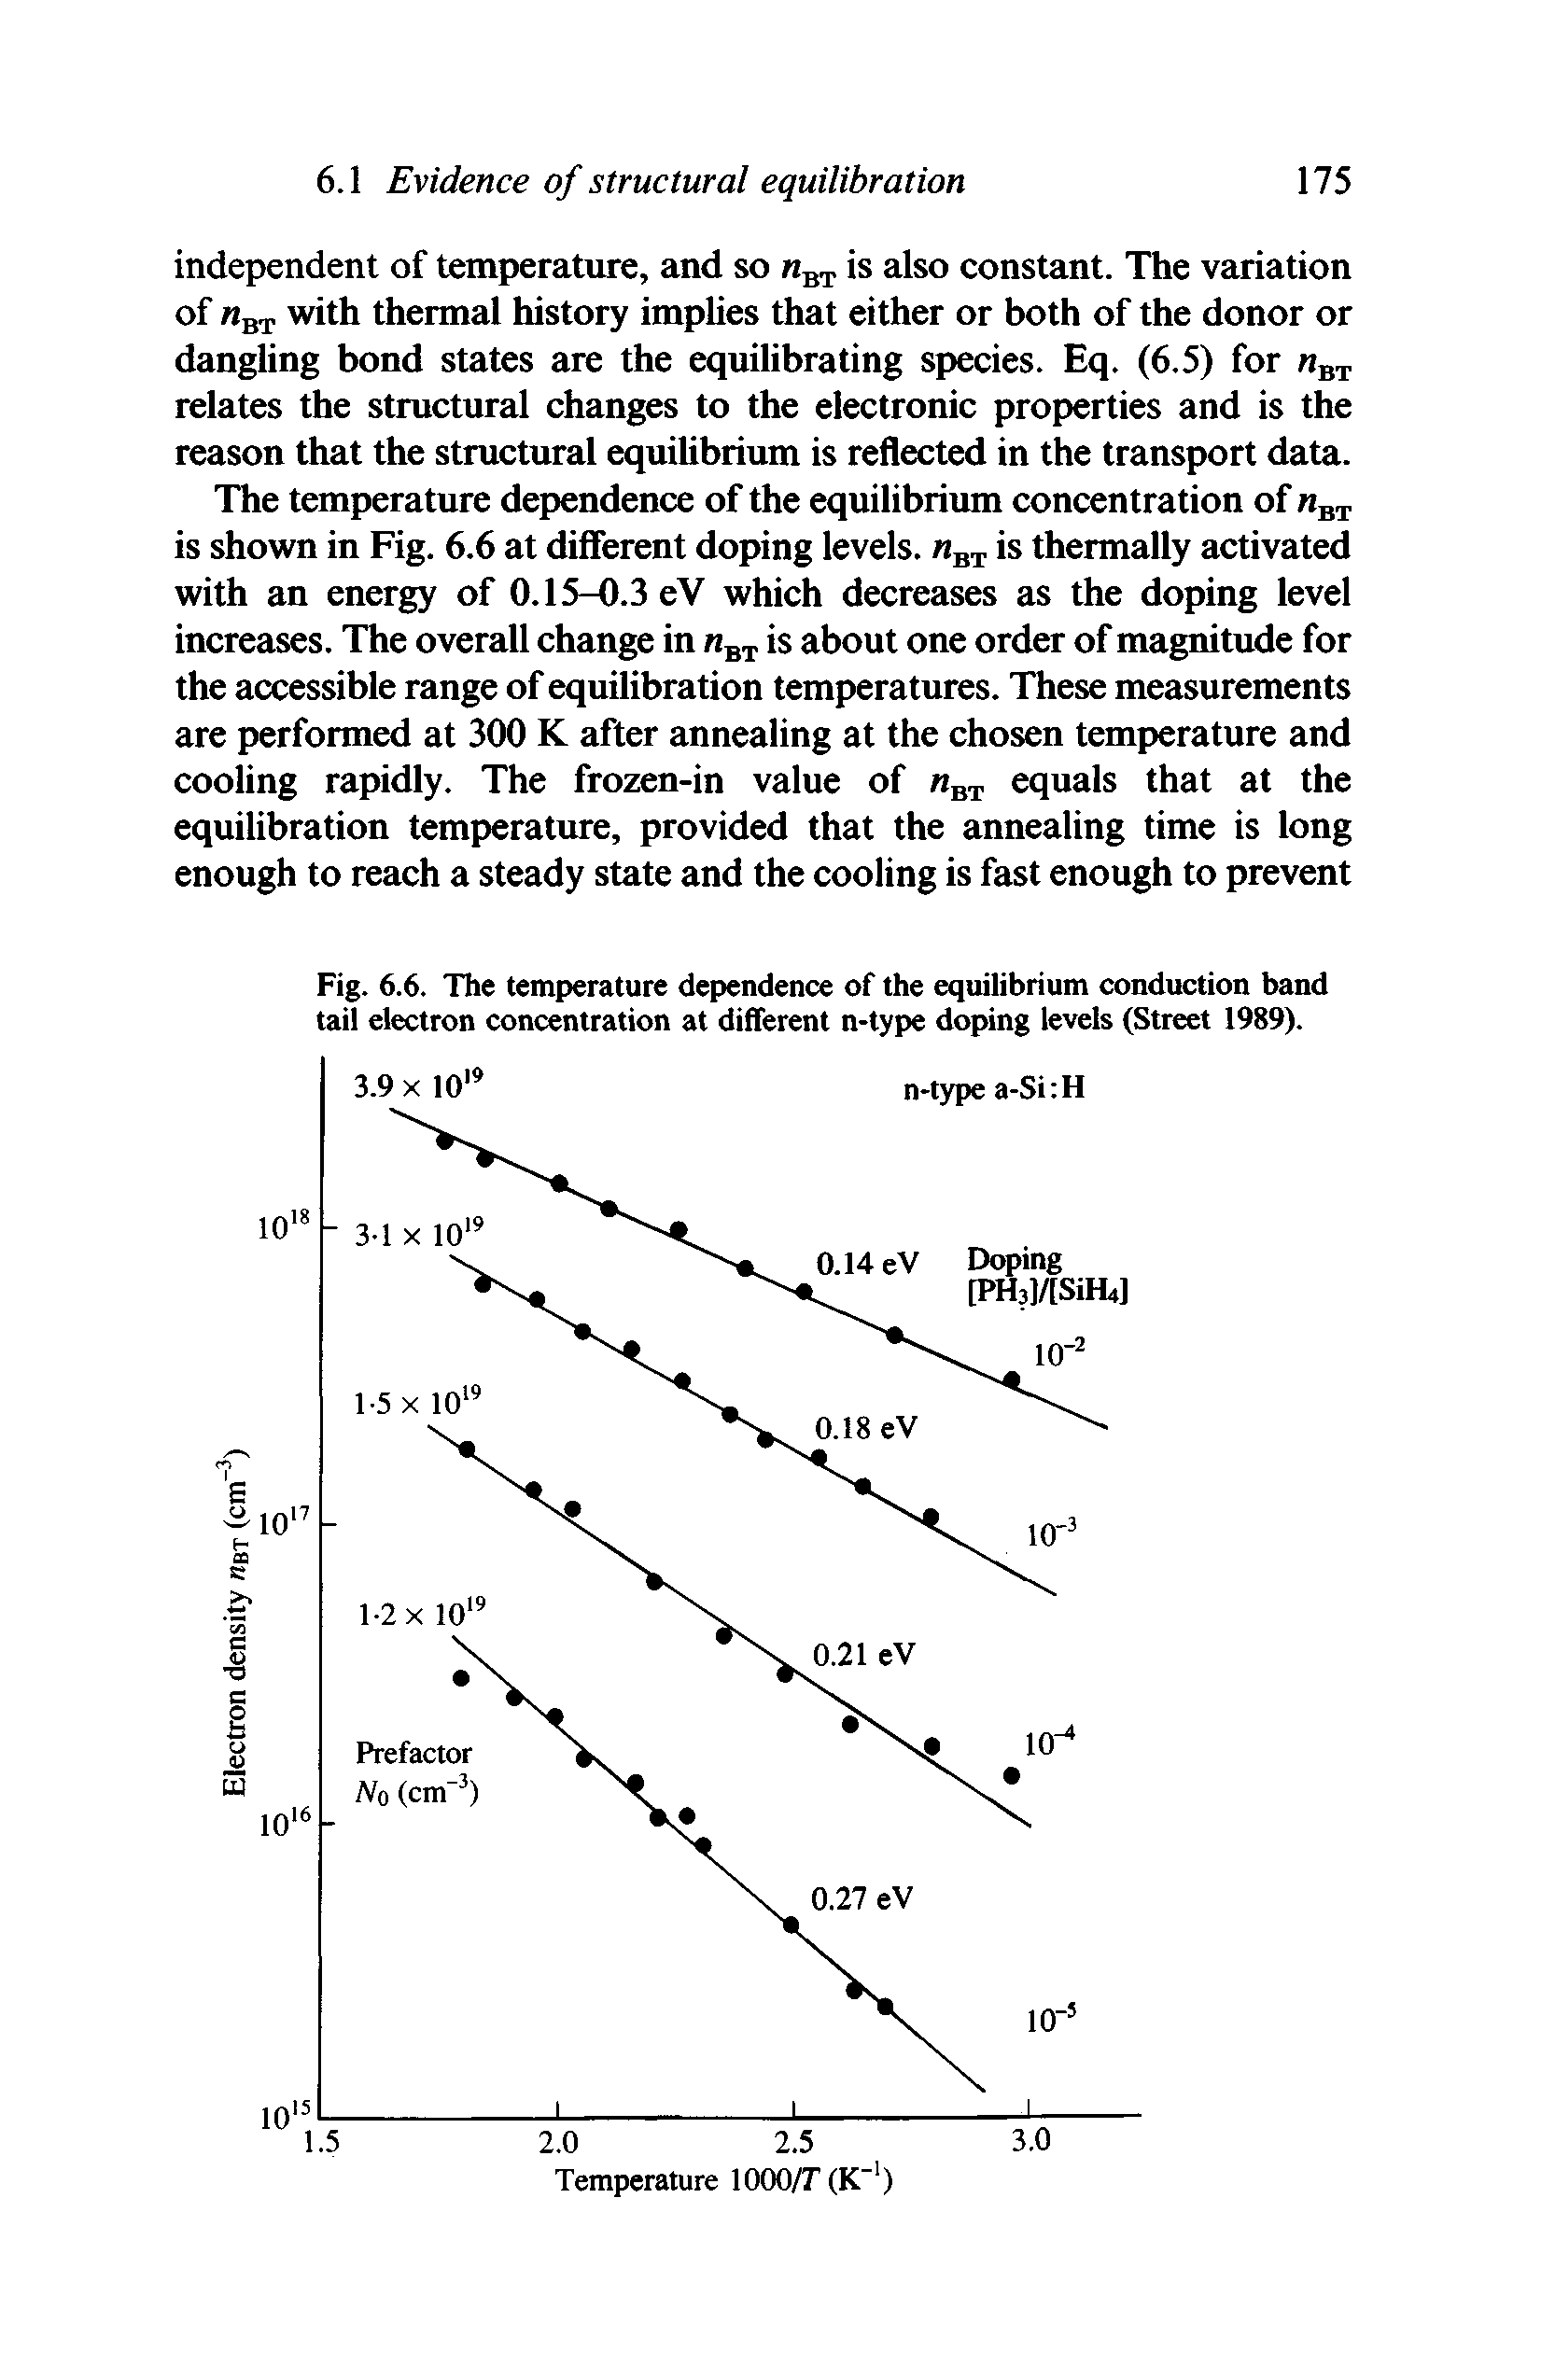 Fig. 6.6. The temperature dependence of the equilibrium conduction band tail electron concentration at different n-type doping levels (Street 1989).